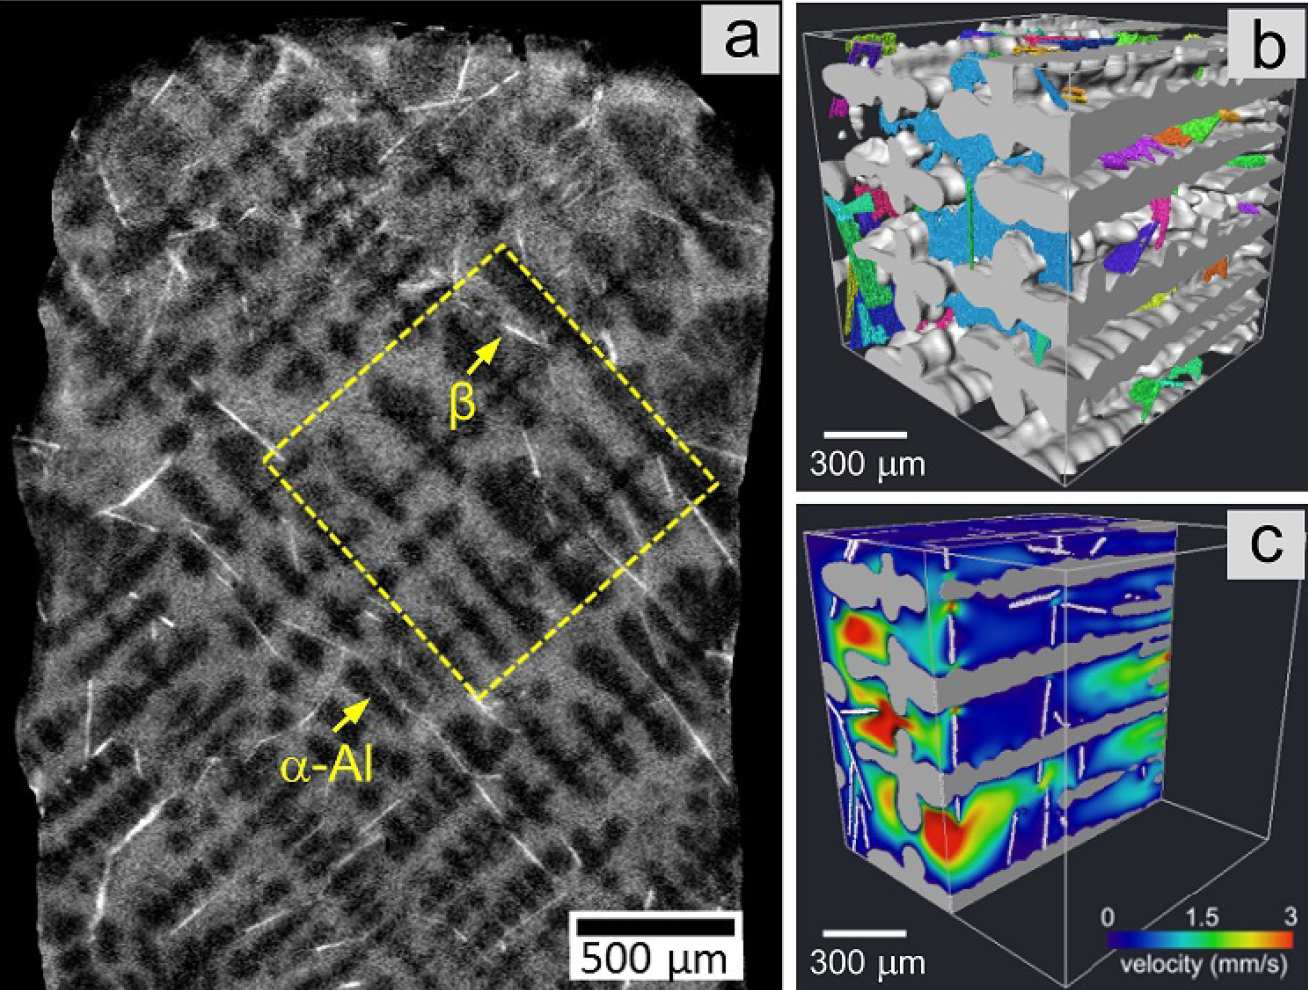 (a) Al-Si-Cu-Fe solidifying microstructure; (b) intermetallics (coloured) and dendrites (light grey) rendered in 3D from an ROI [yellow square in (a)]; (c) CFD simulated velocity field showing how intermetallics block liquid flow.